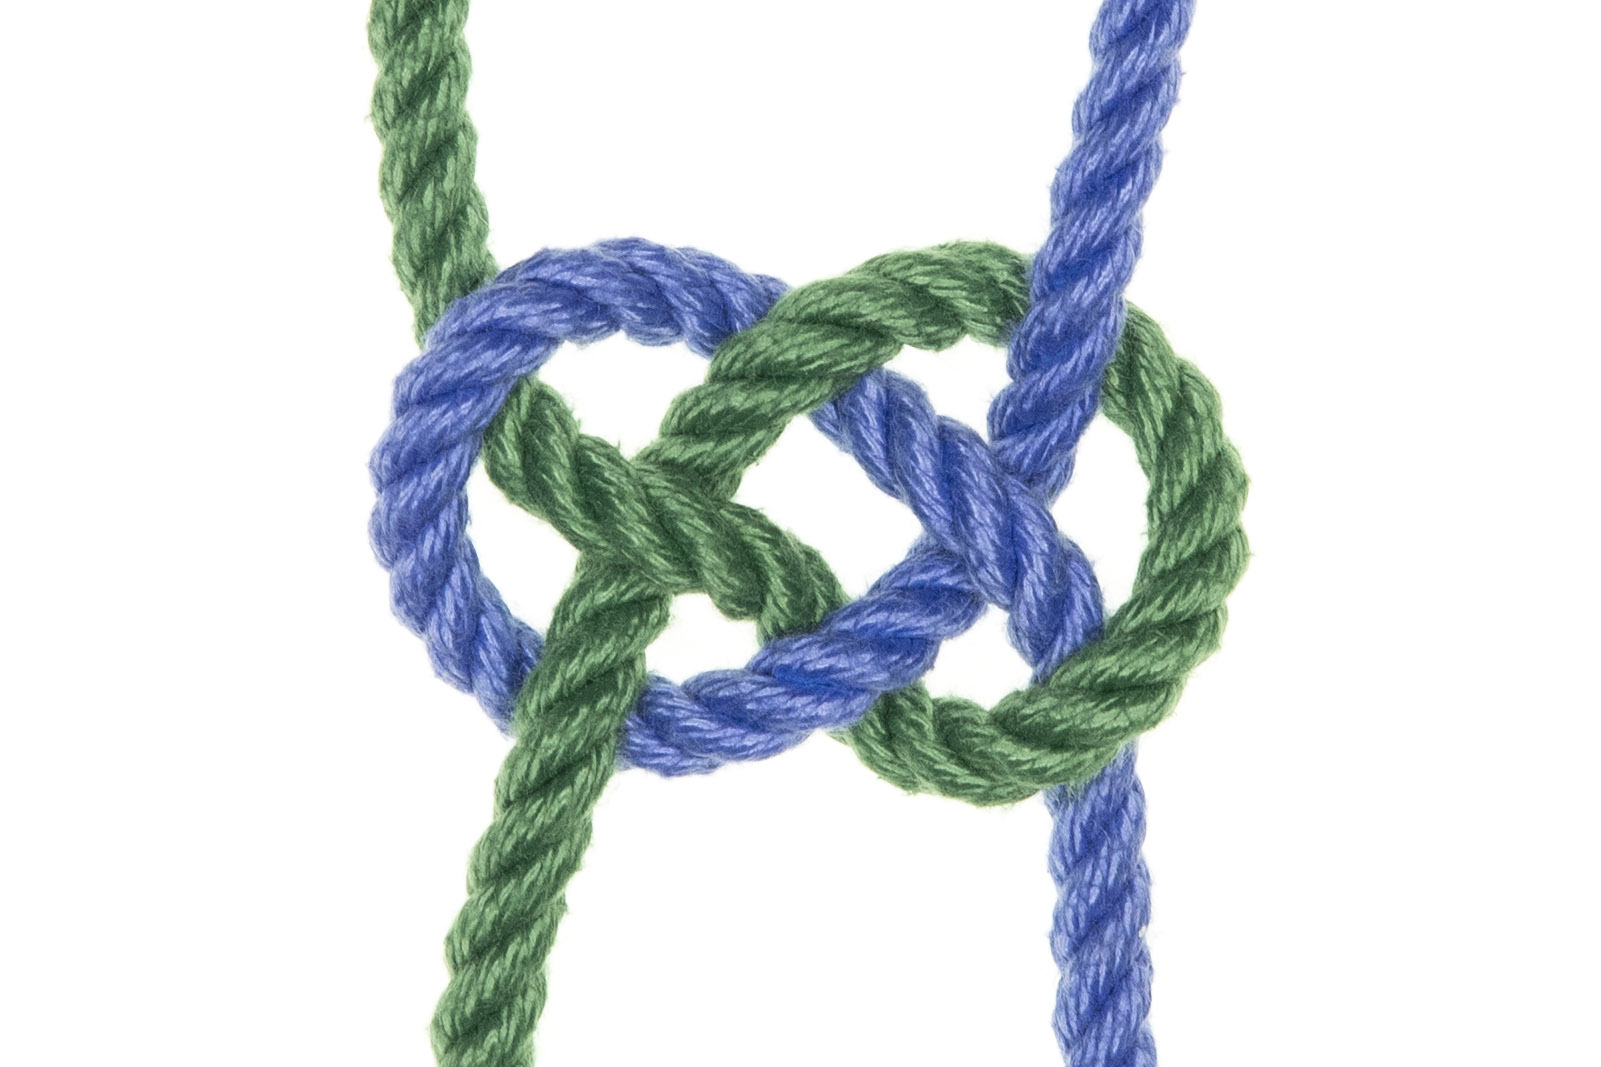 A green rope and a blue rope threaded together to form a double coin knot.